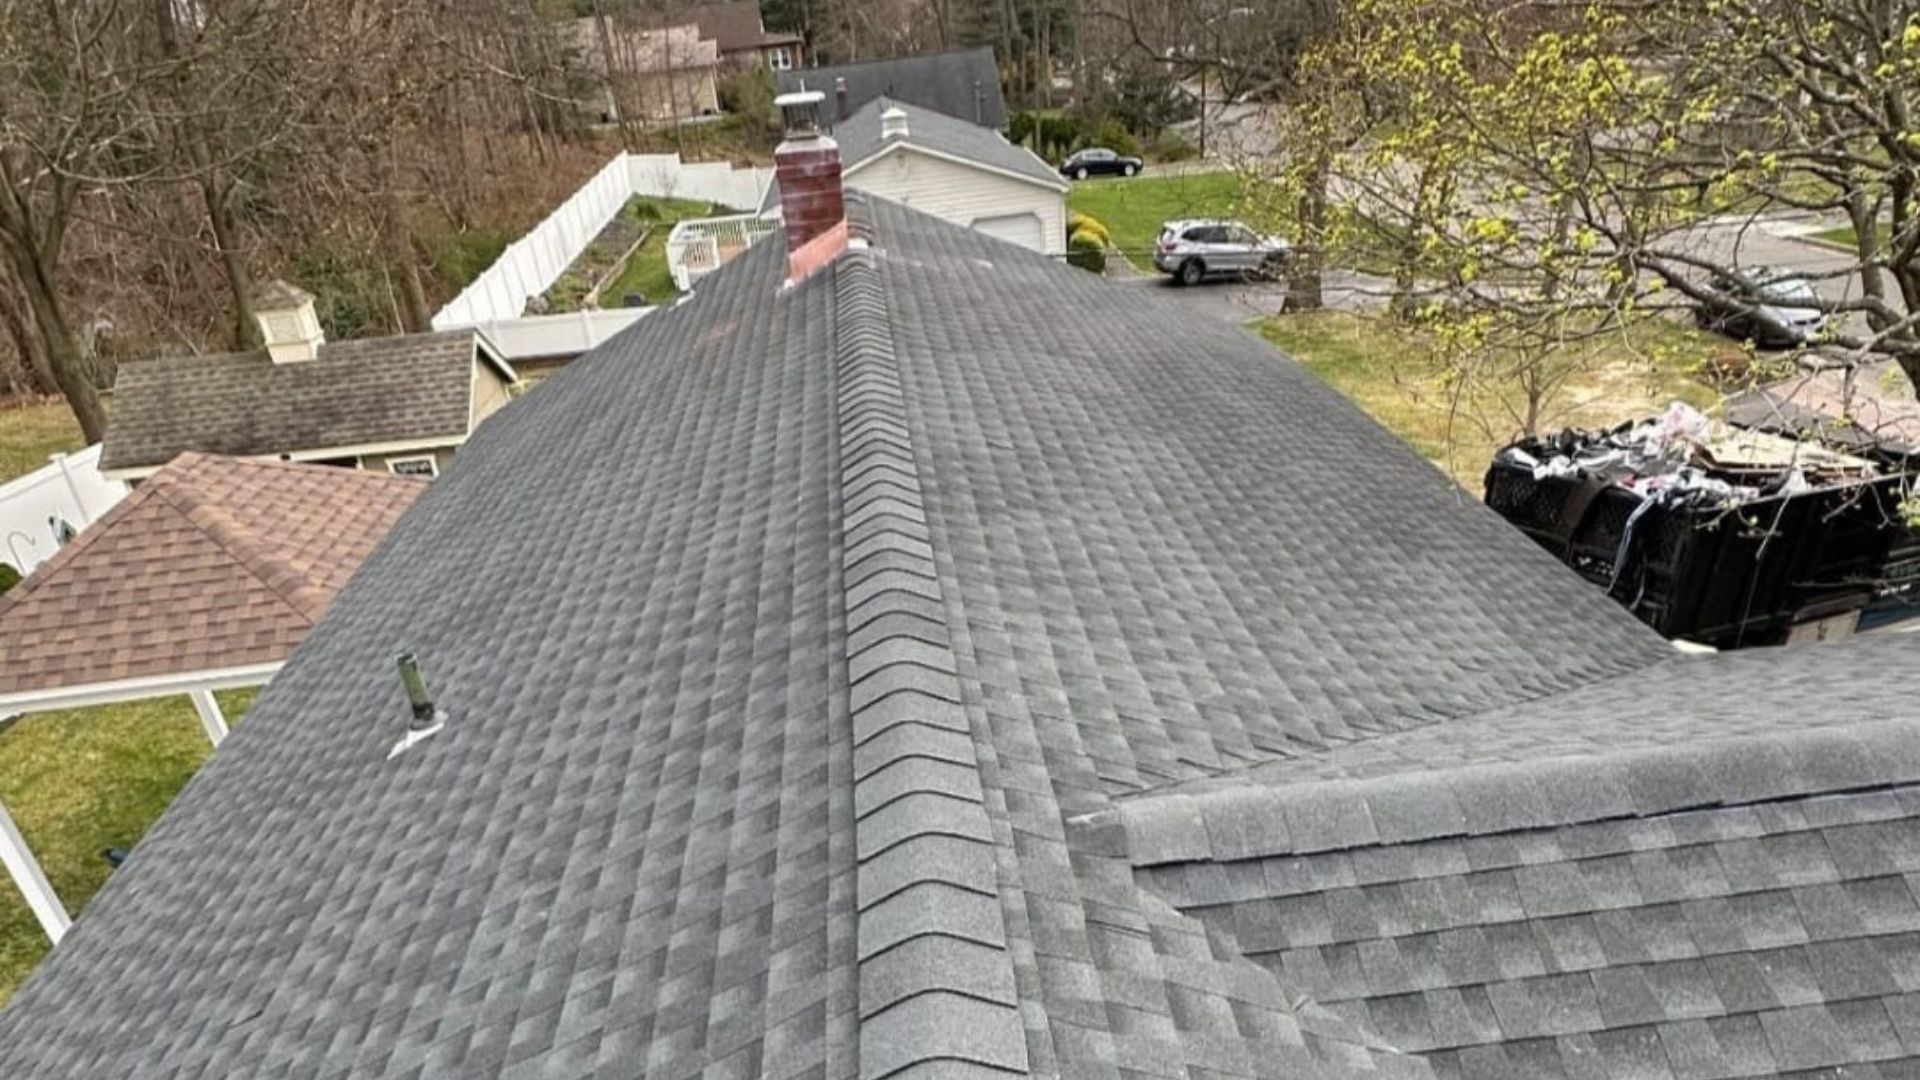 Shingle Roof Replacement Service in the Bronx NYC Project Shot